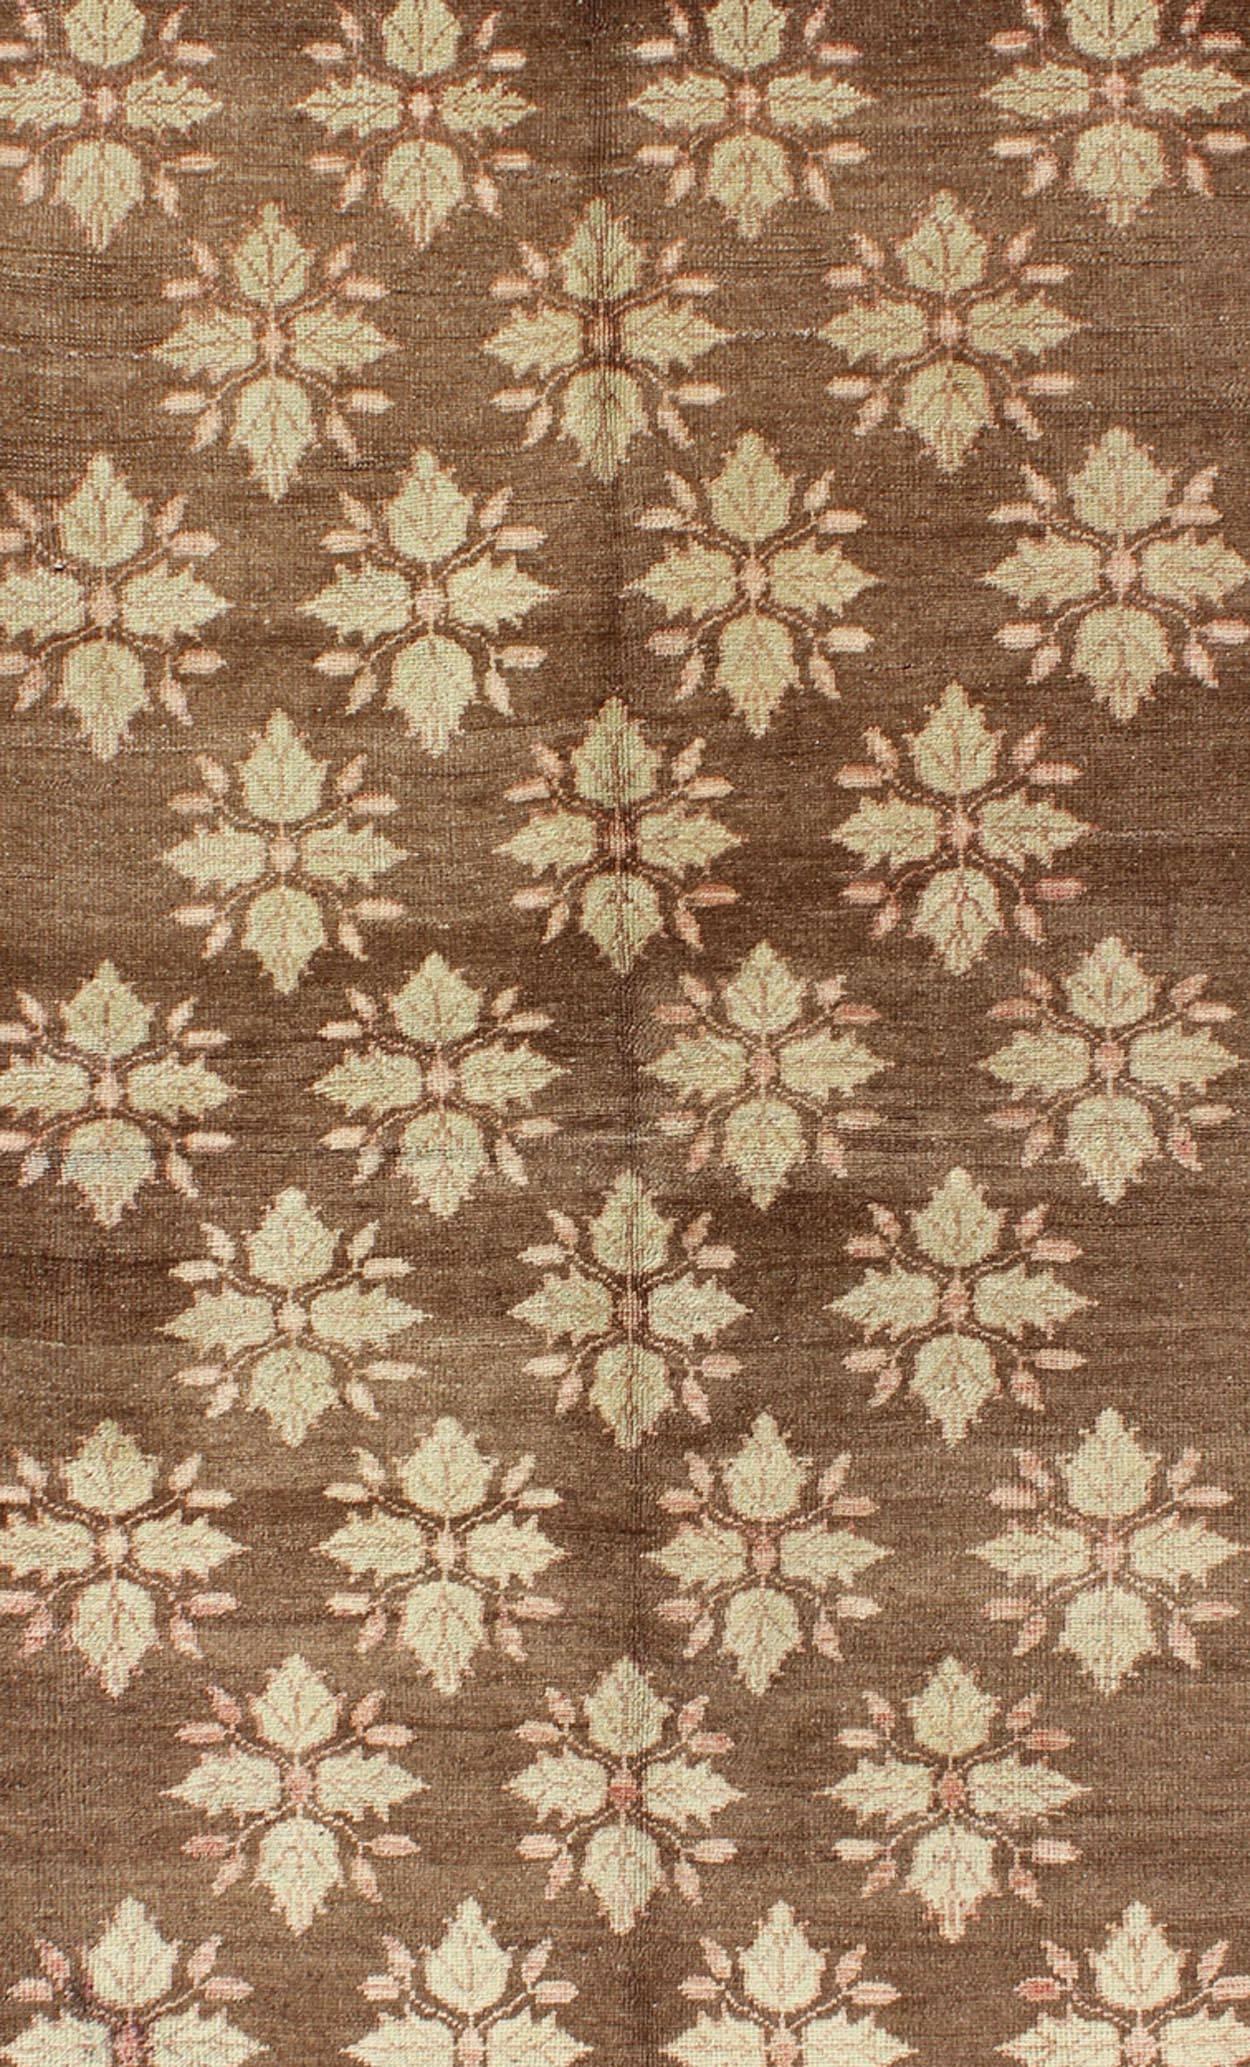 Hand-Knotted Midcentury Turkish Tulu Rug with Mini Blossom Medallions in Brown and Ivory